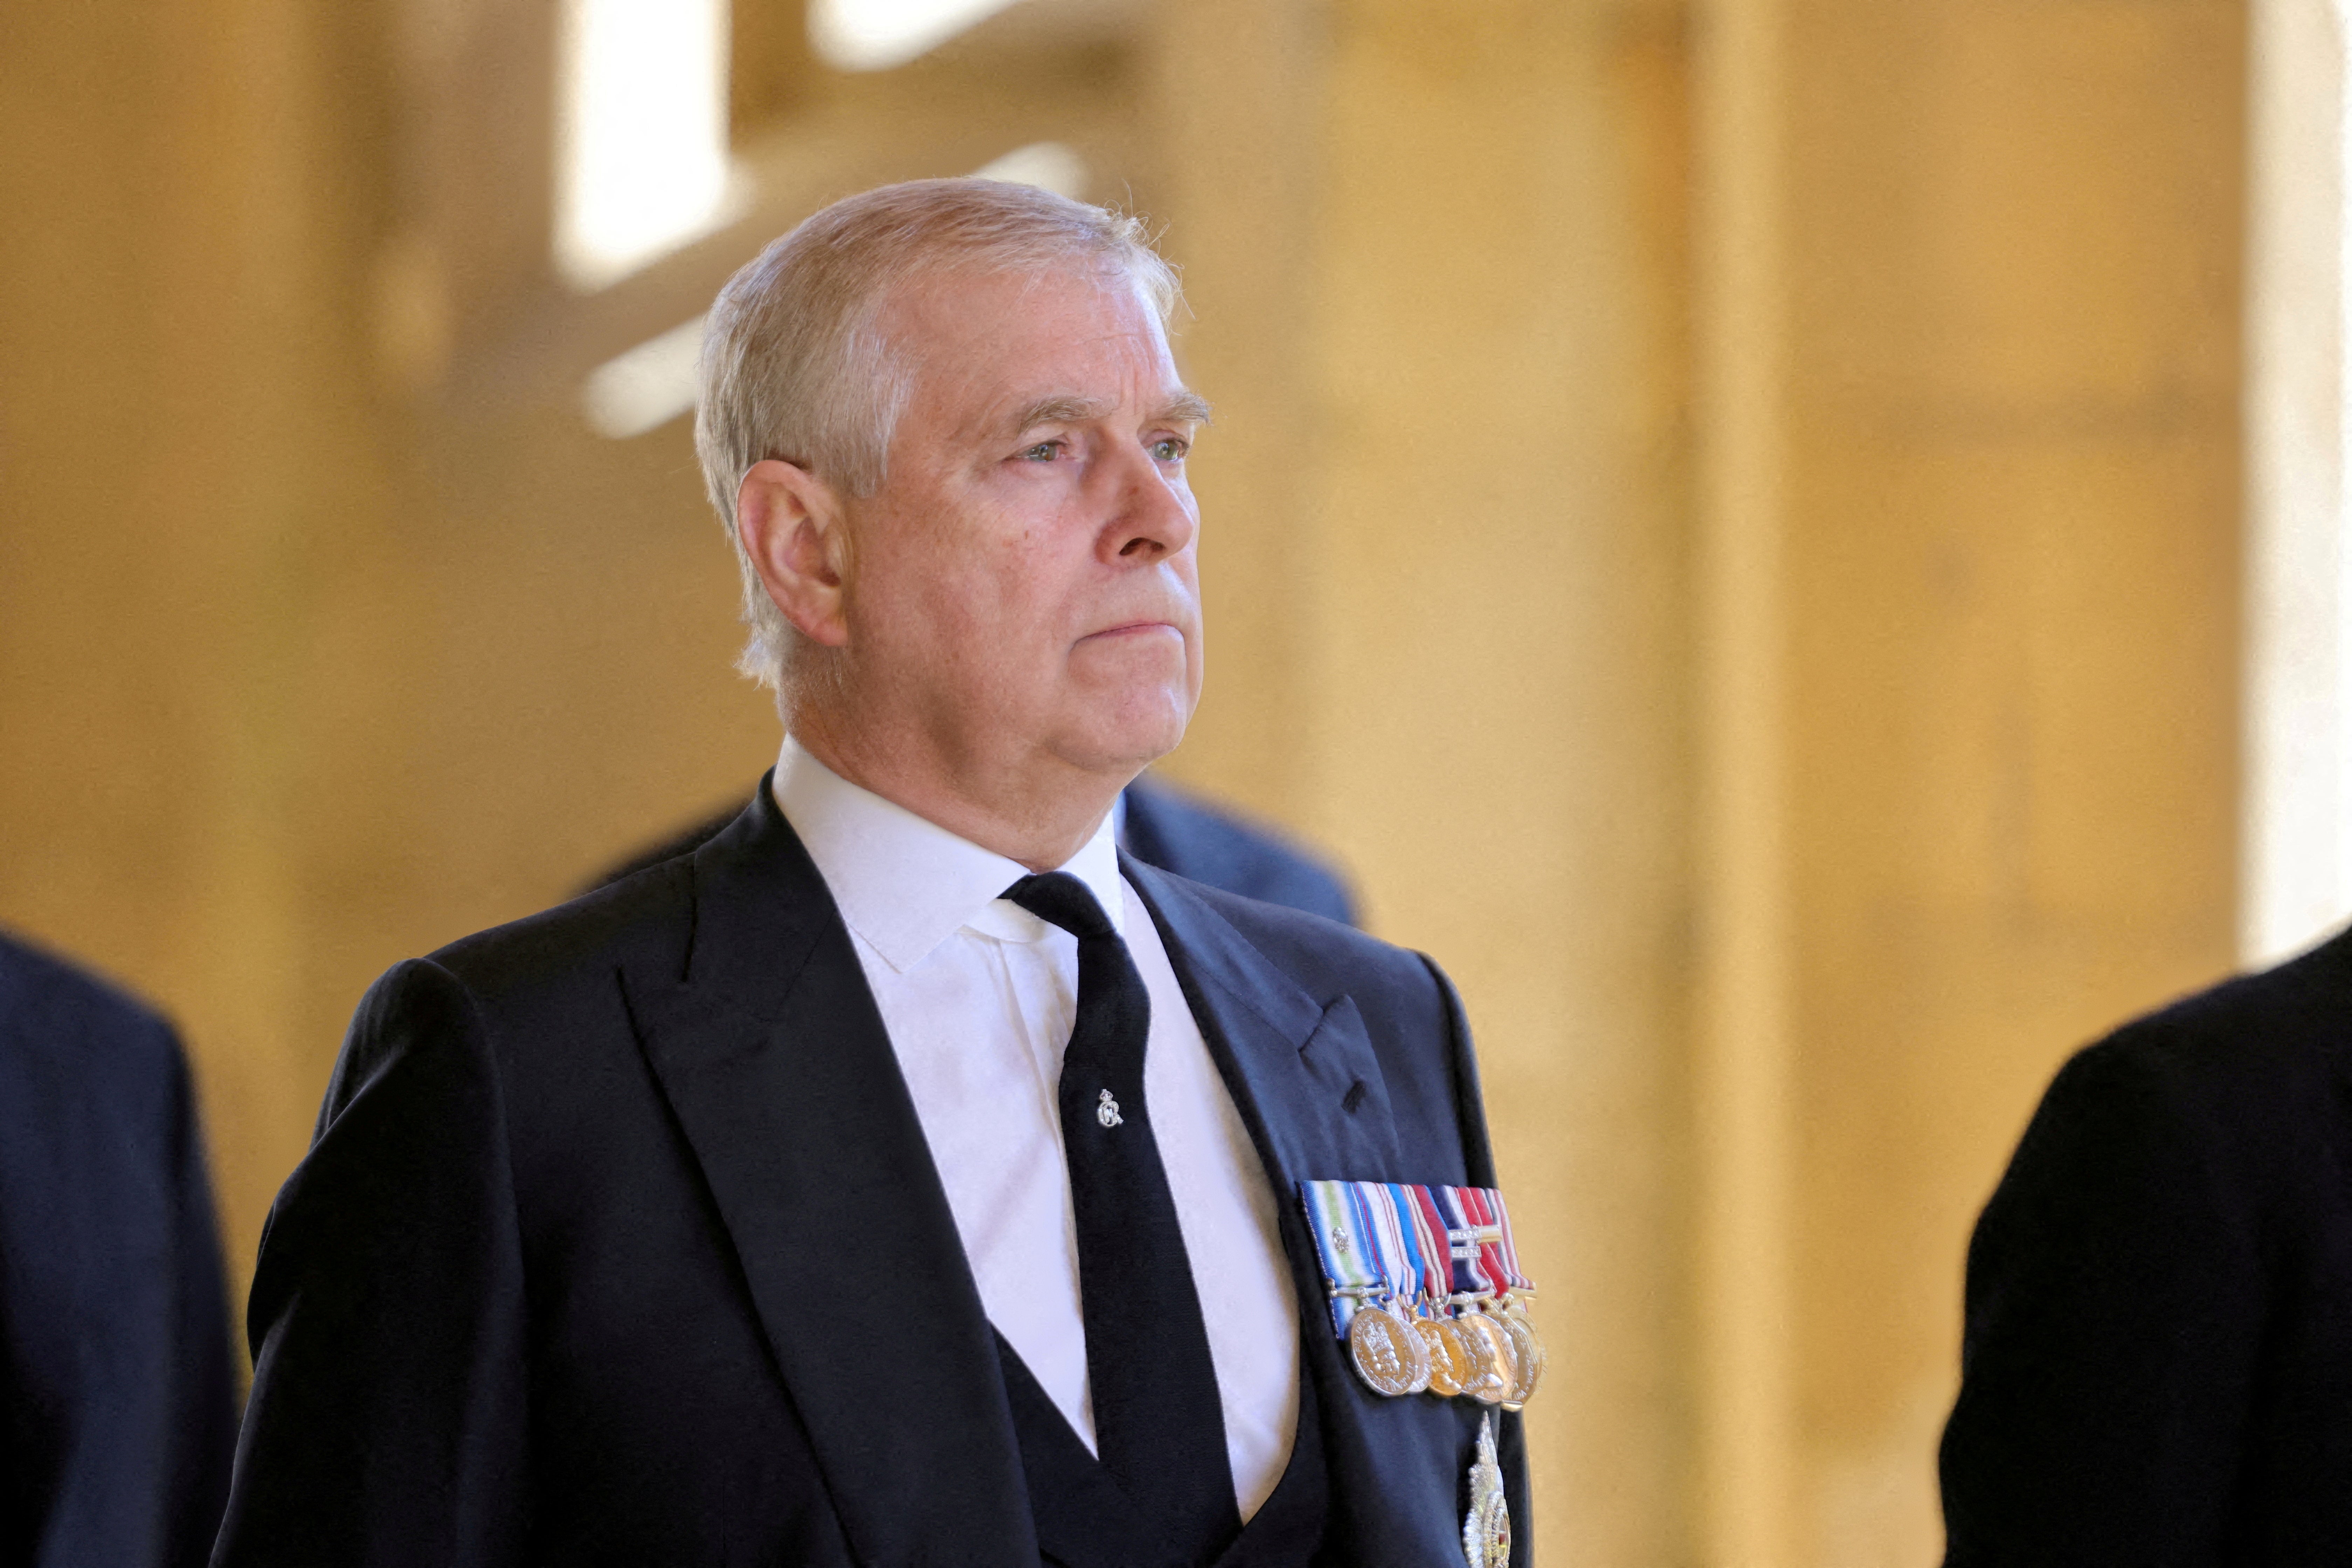 The Duke of York has stepped back from royal duties and public life